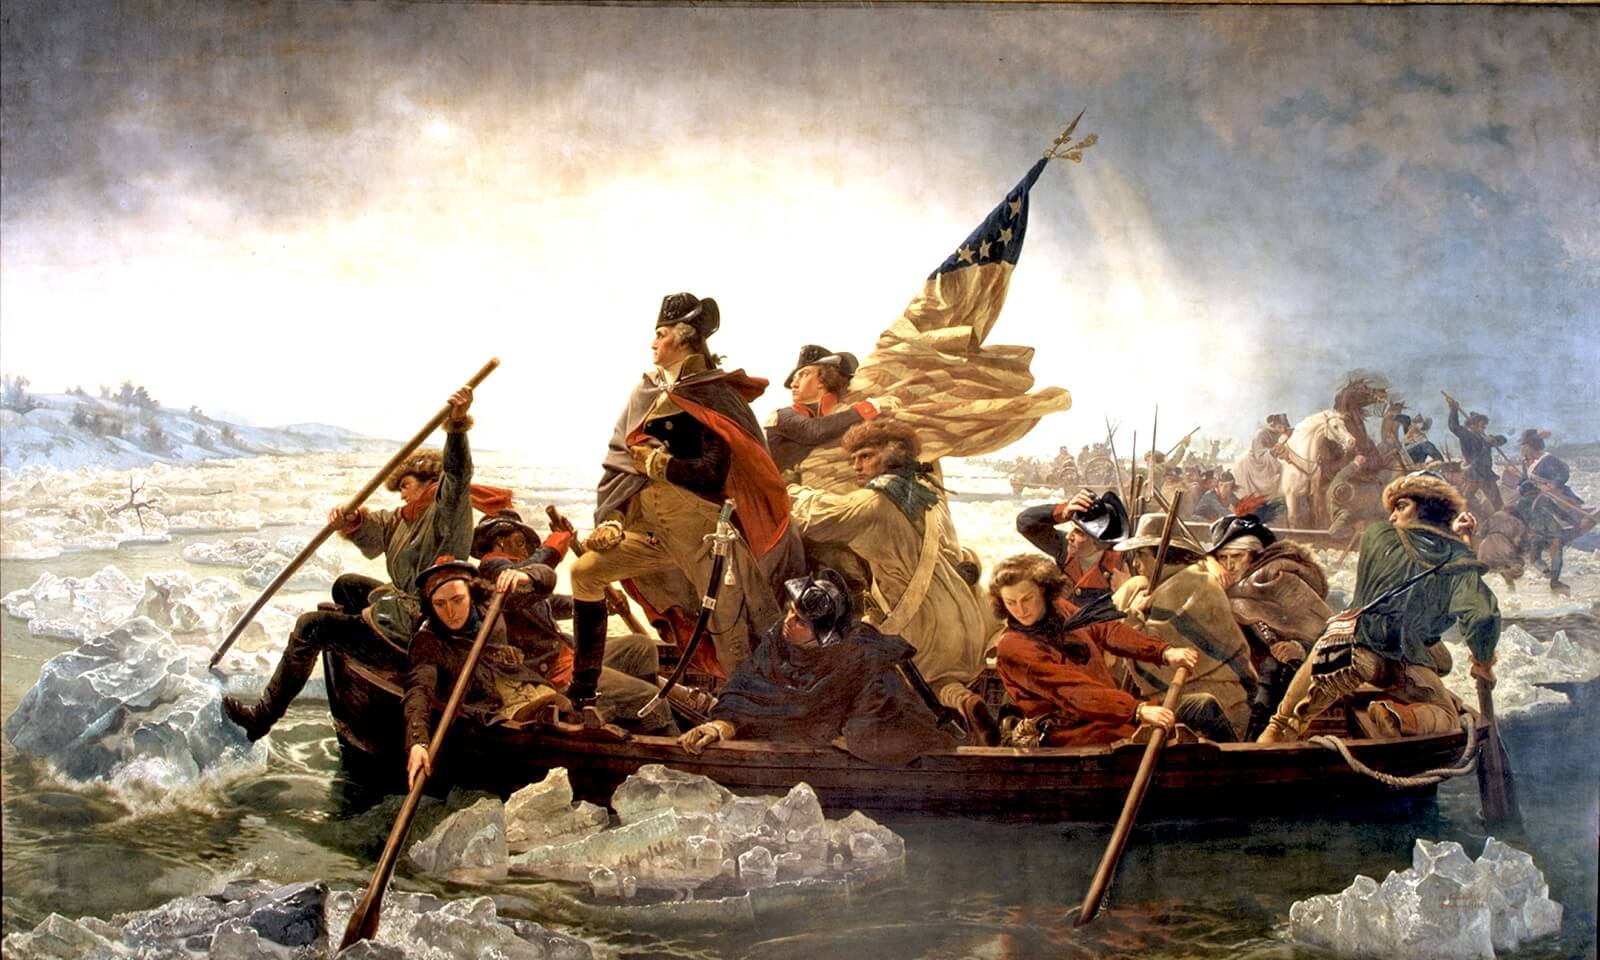 when did emanuel leutze paint the oil painting of washington crossing the delaware